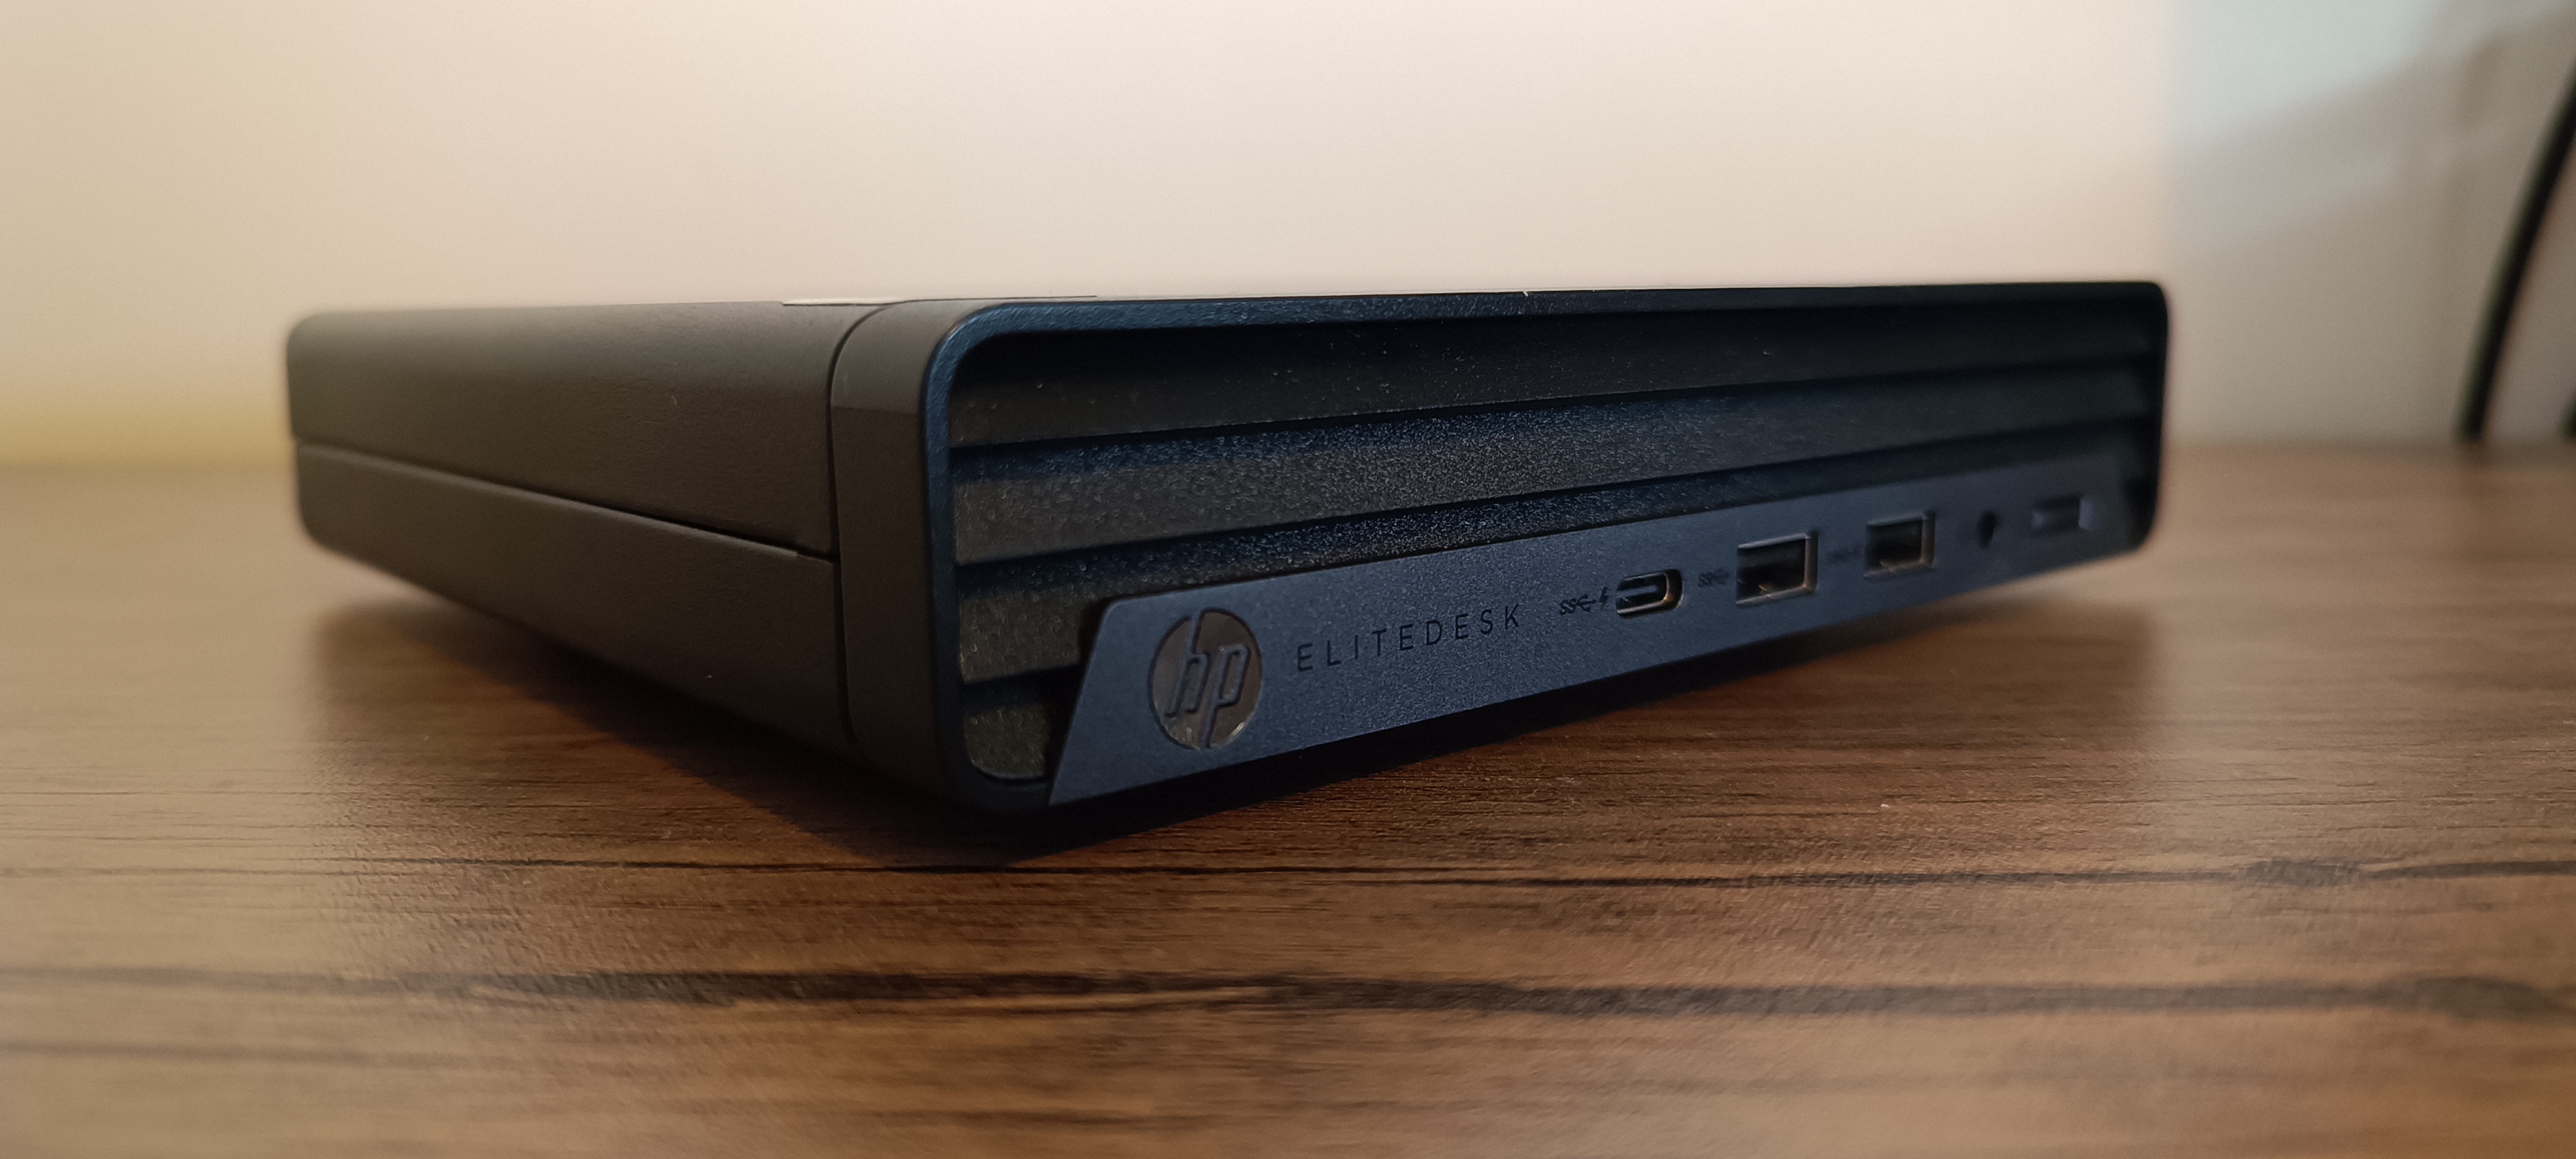 HP EliteDesk 800 G6 Desktop Mini review: affordable but underpowered mini PC Creative Bloq